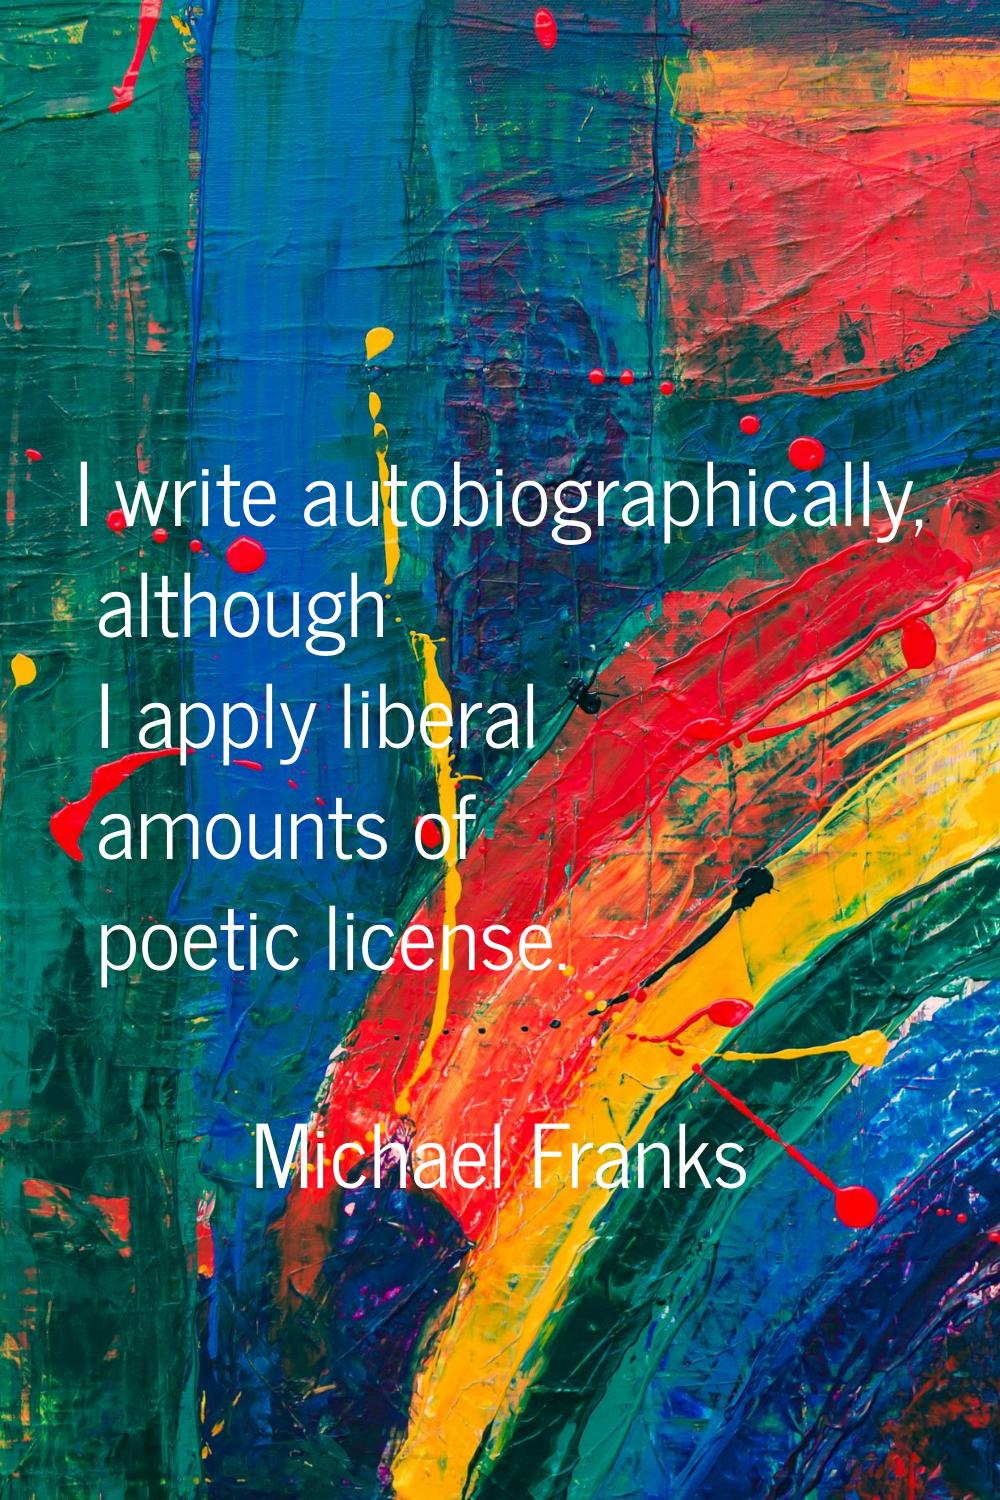 I write autobiographically, although I apply liberal amounts of poetic license.